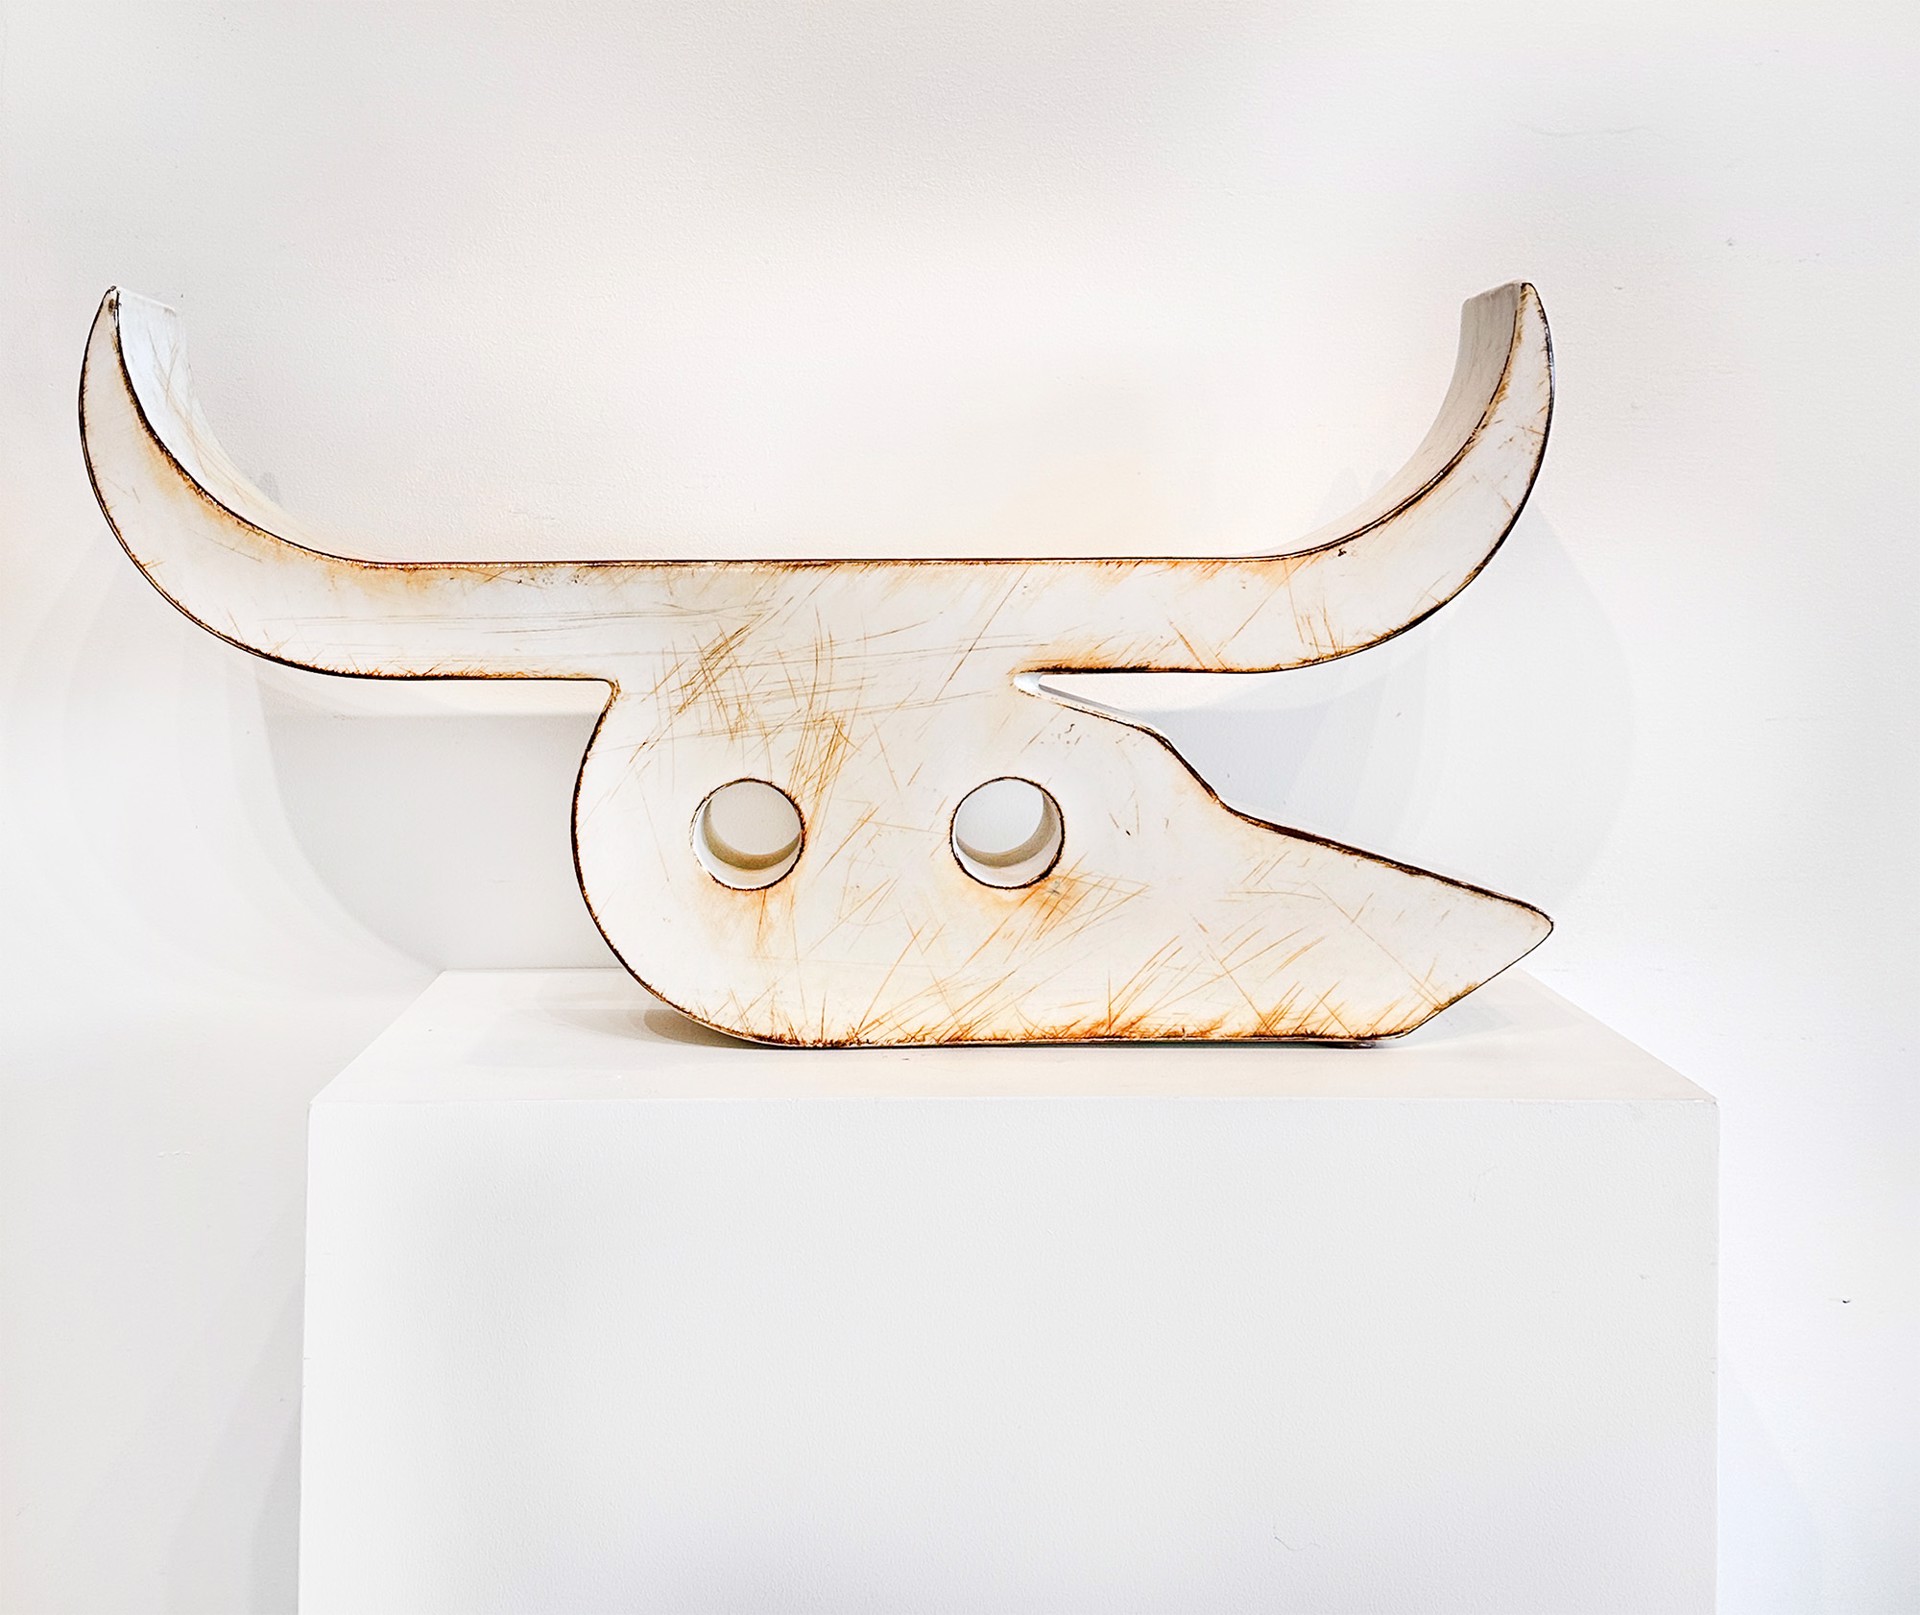 Steel Sculpture By Jeffie Brewer Featuring A Longhorn Cow Skull In White Rust Finish